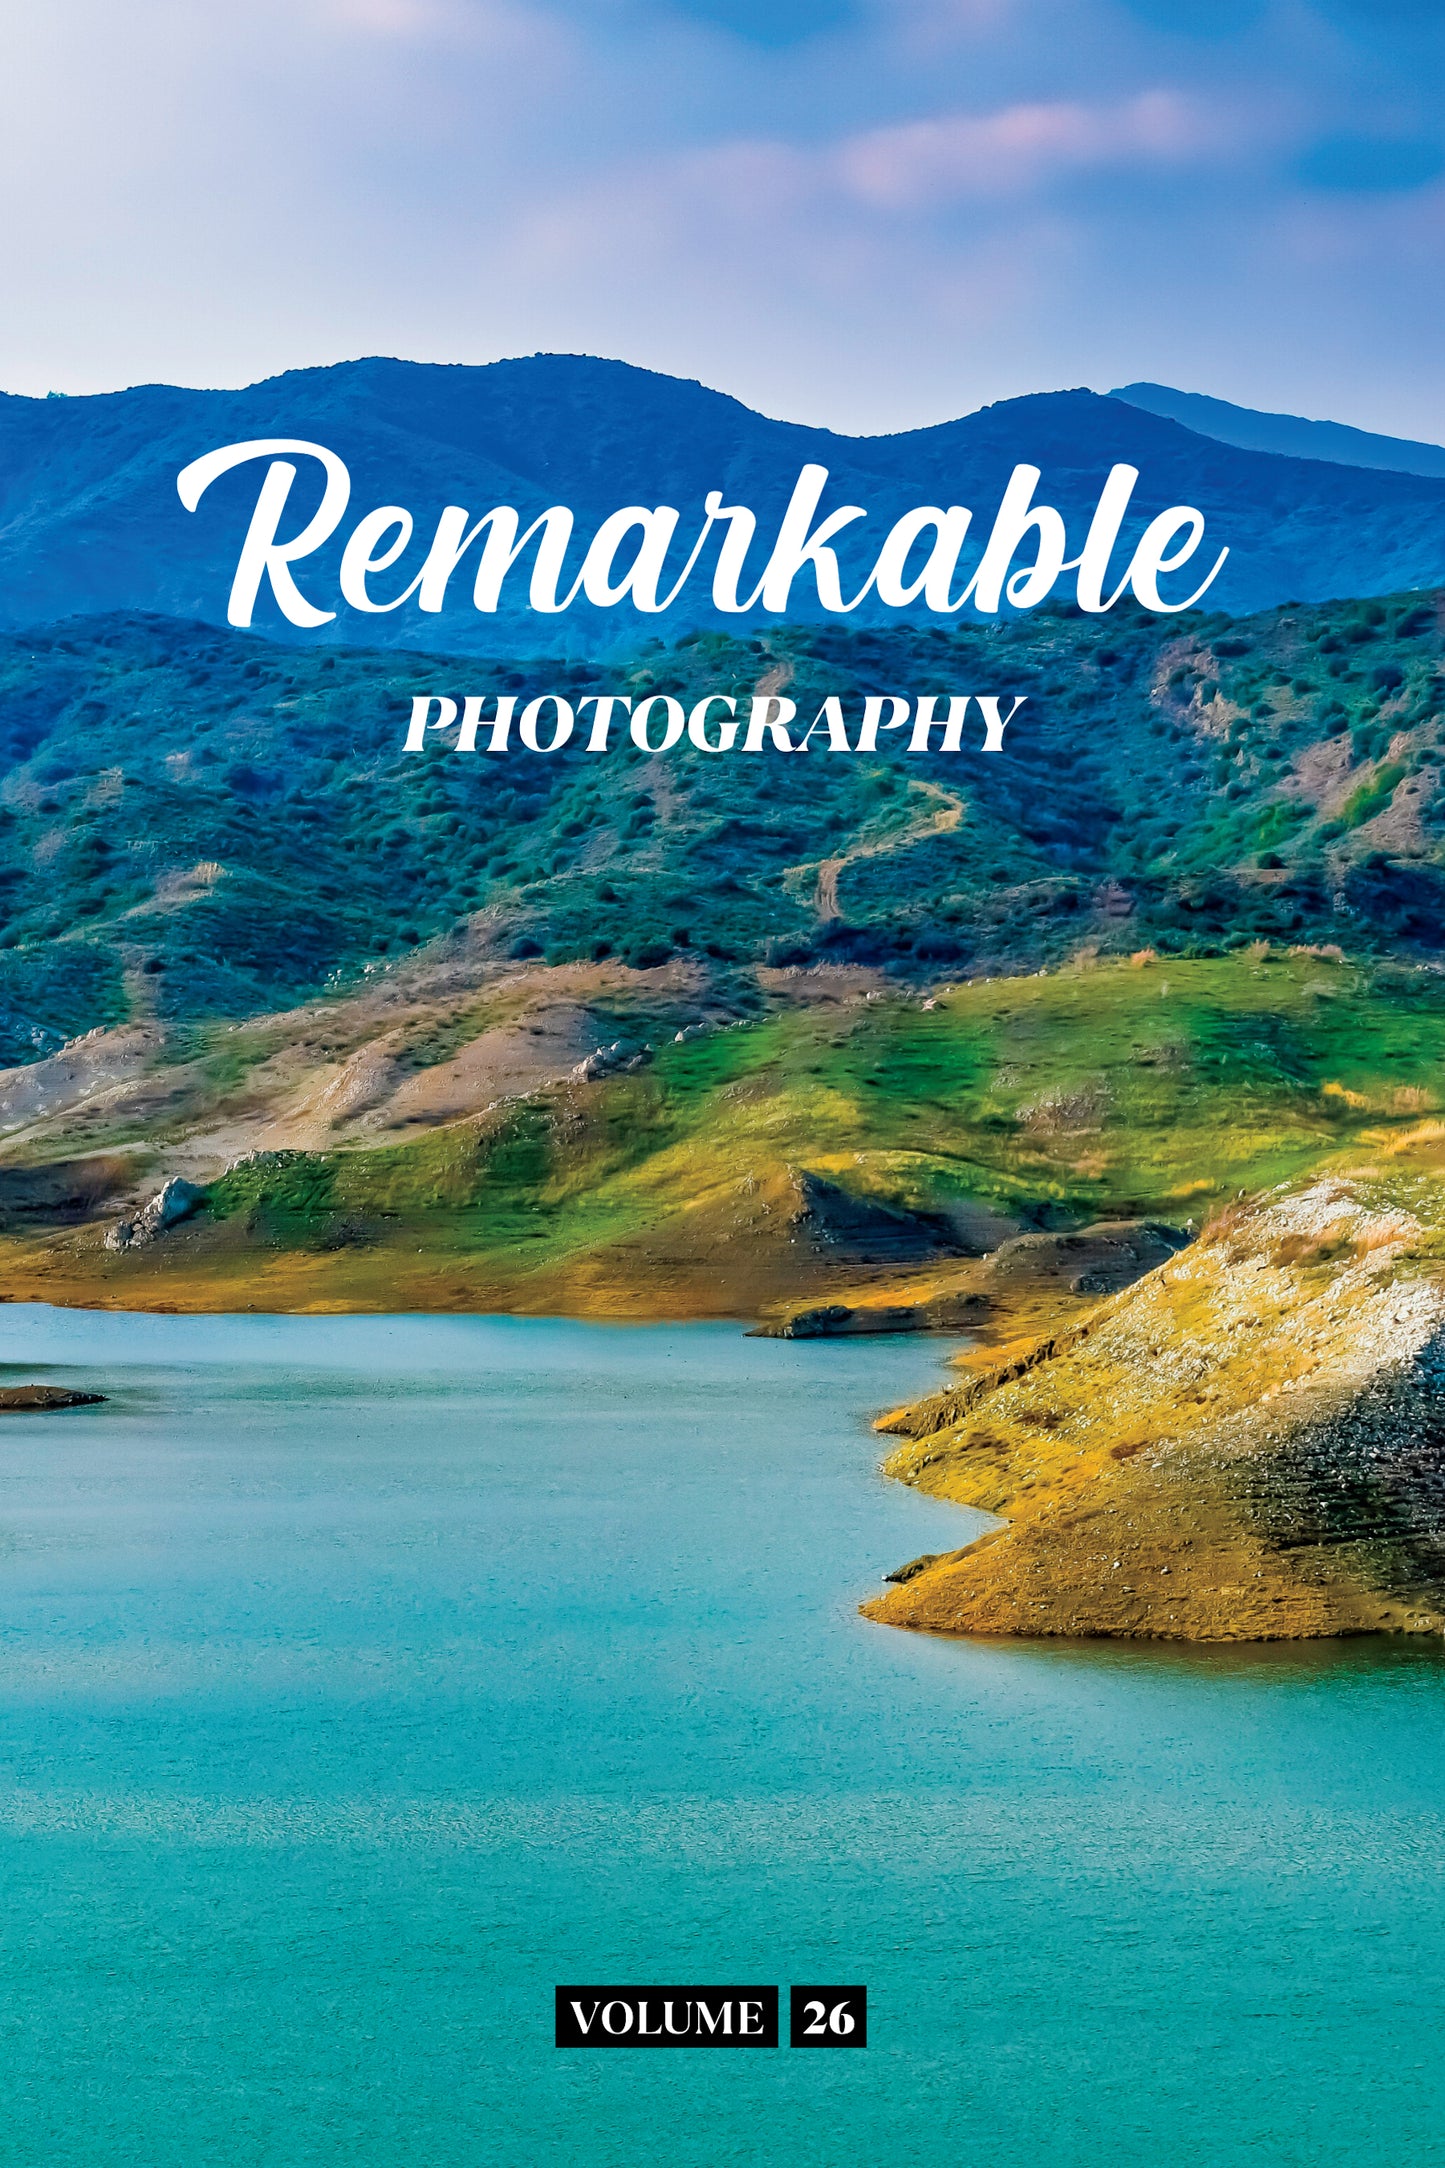 Remarkable Photography Volume 26 (Physical Book Pre-Order)